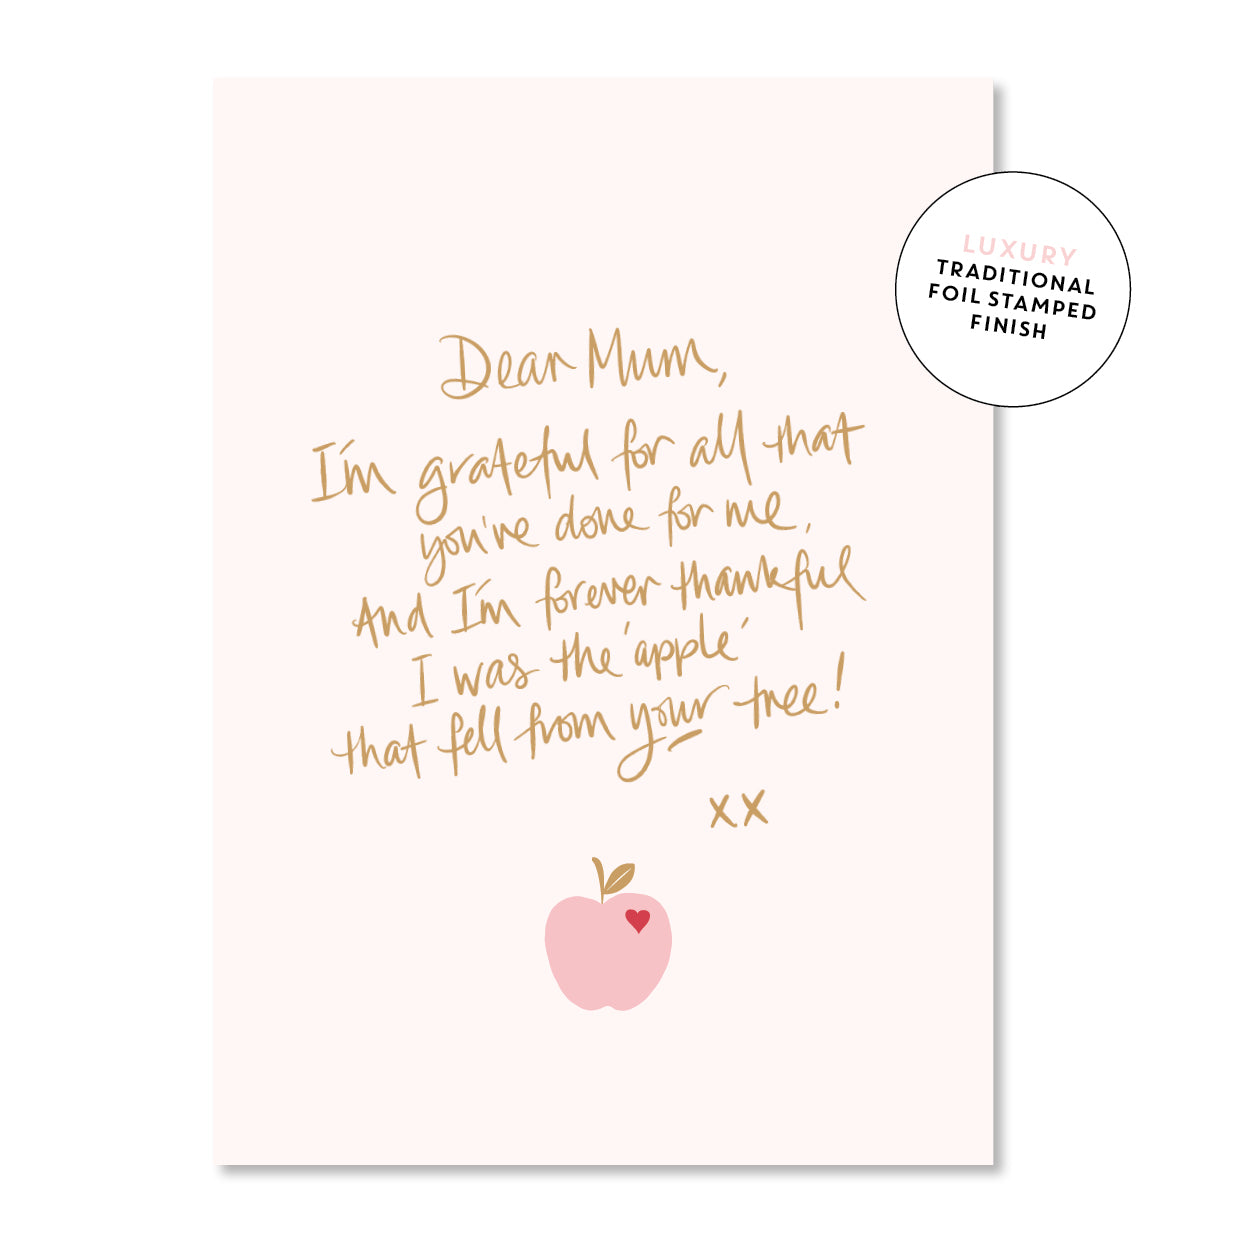 A Letter to Mum...